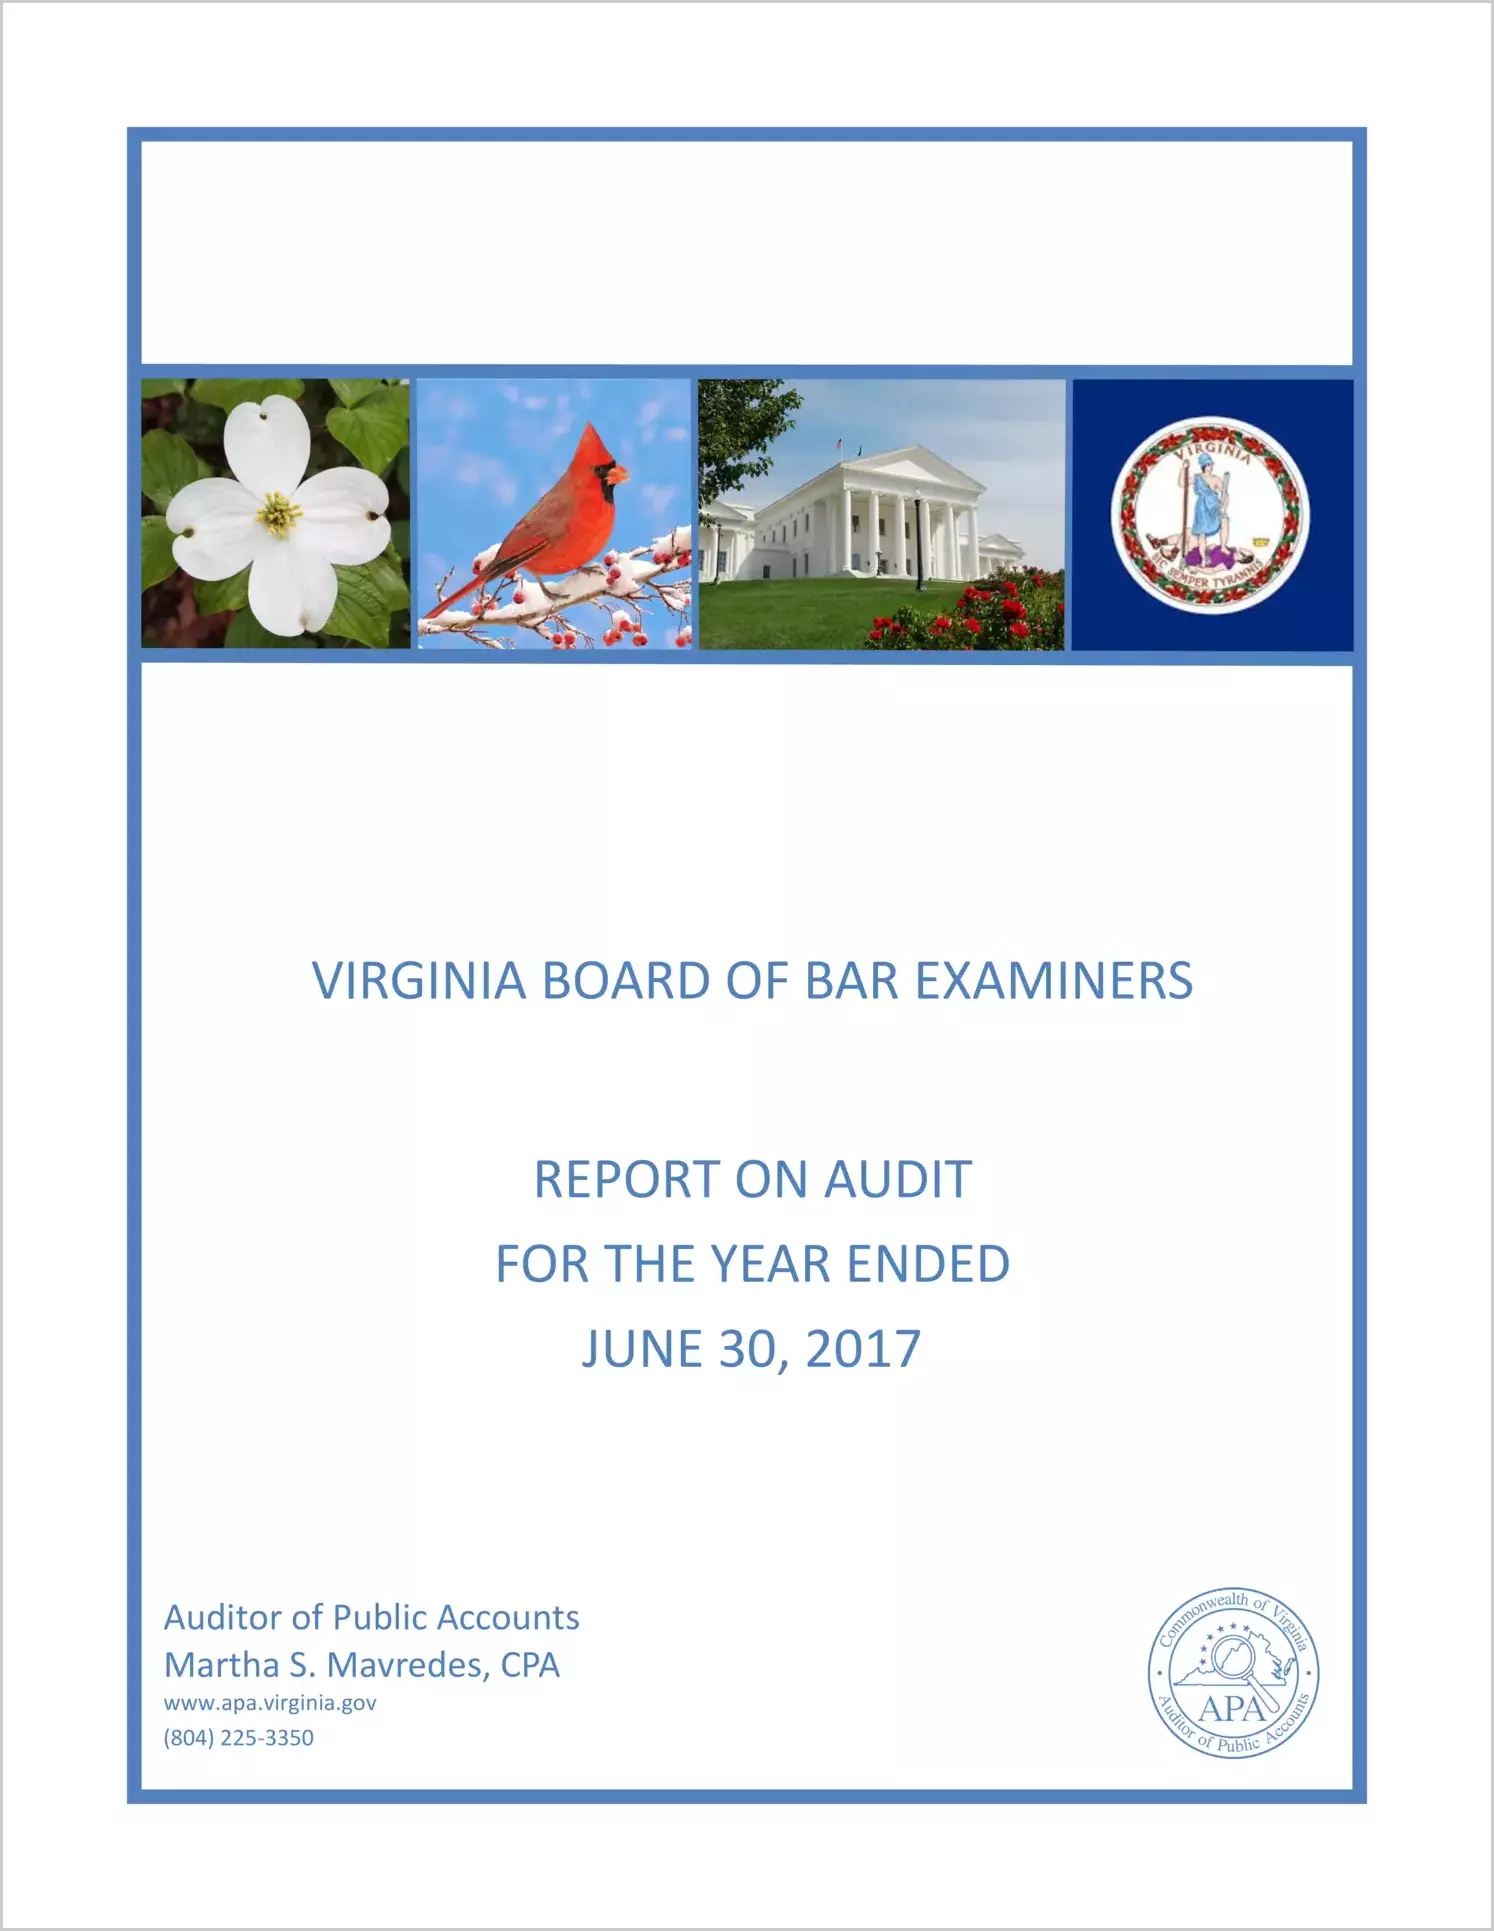 Virginia Board of Bar Examiners for the year ended June 30, 2017